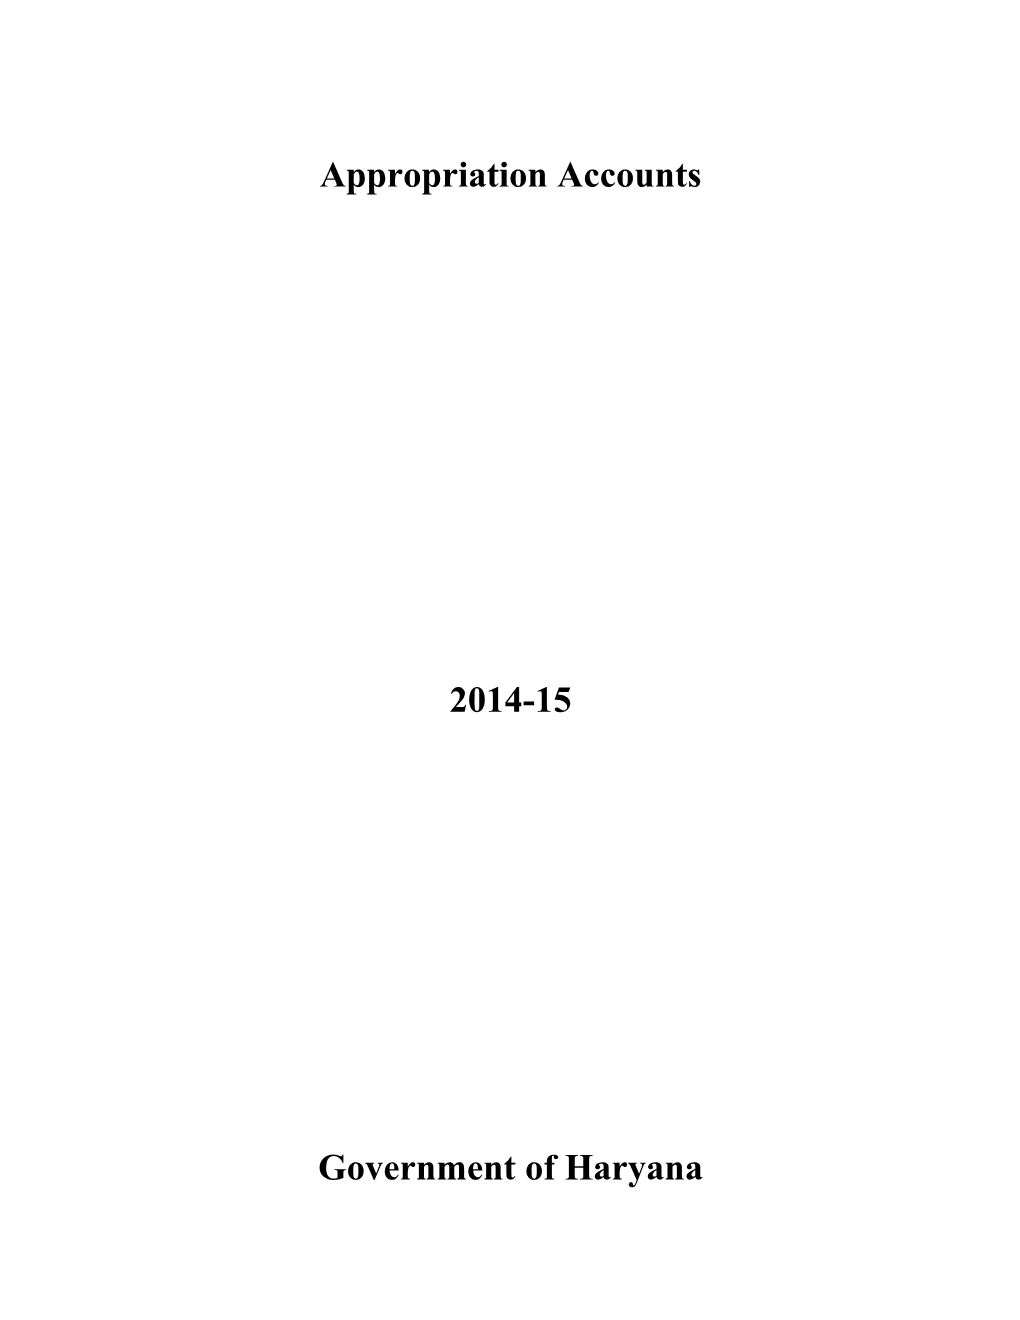 Appropriation Accounts-2014-15